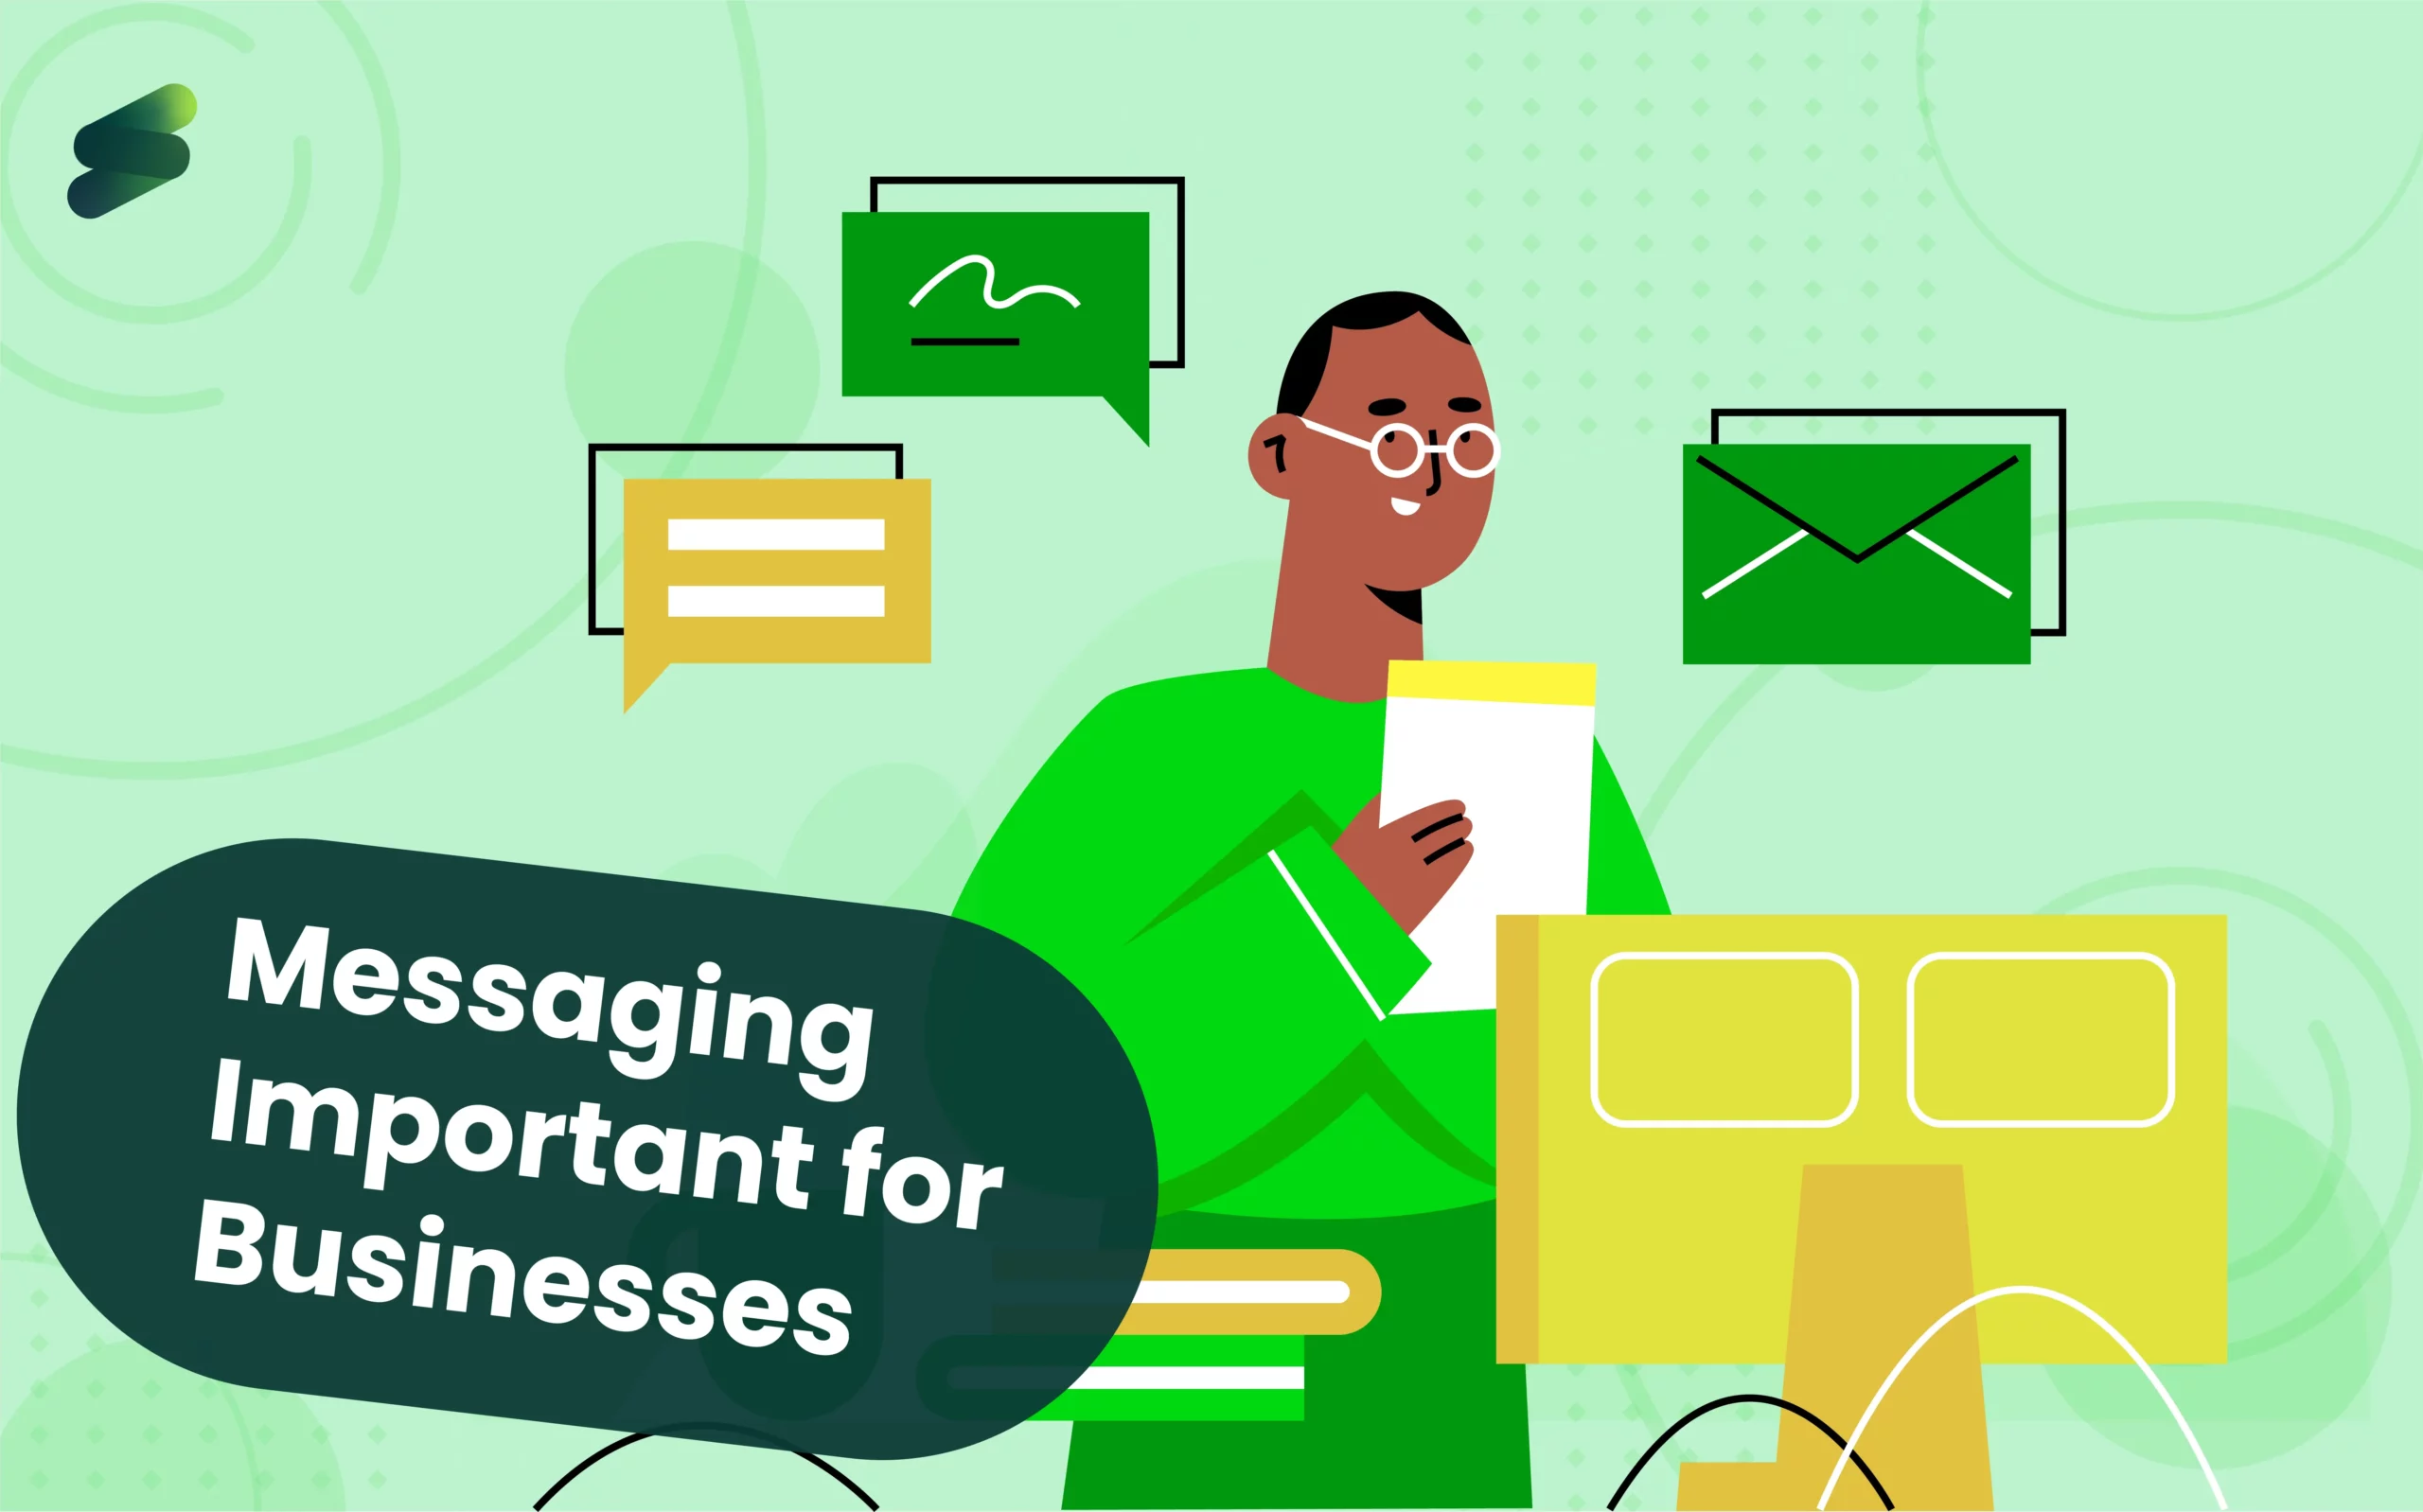 Why Is Messaging Important for Businesses